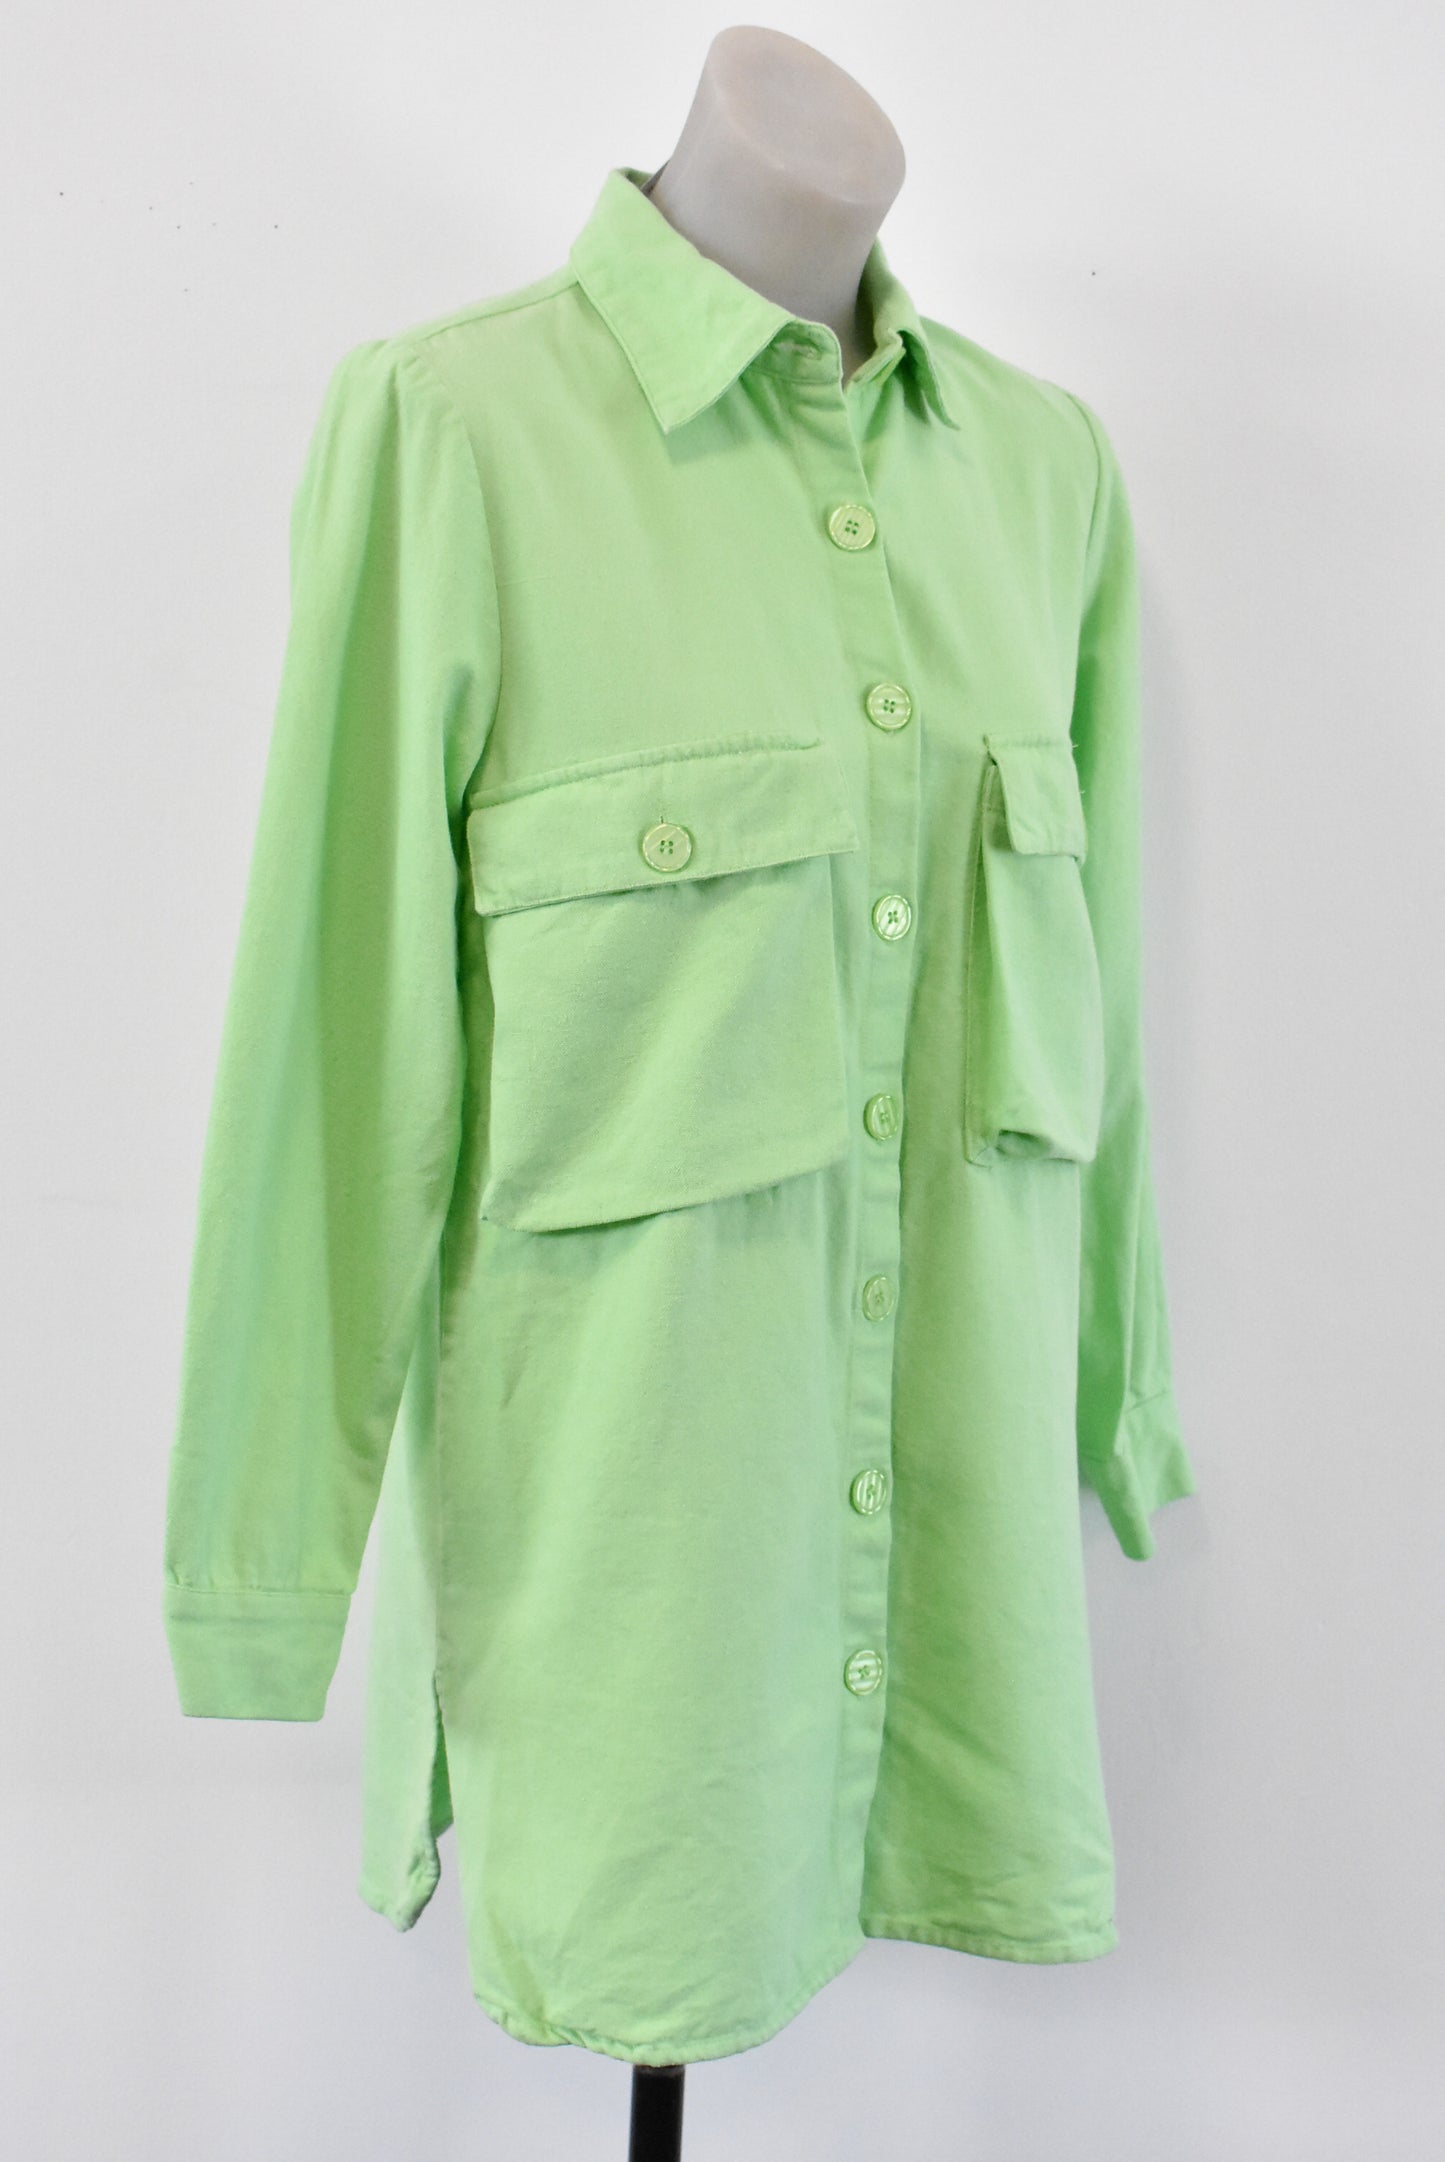 Pretty Little Thing lime green button up top, size 8